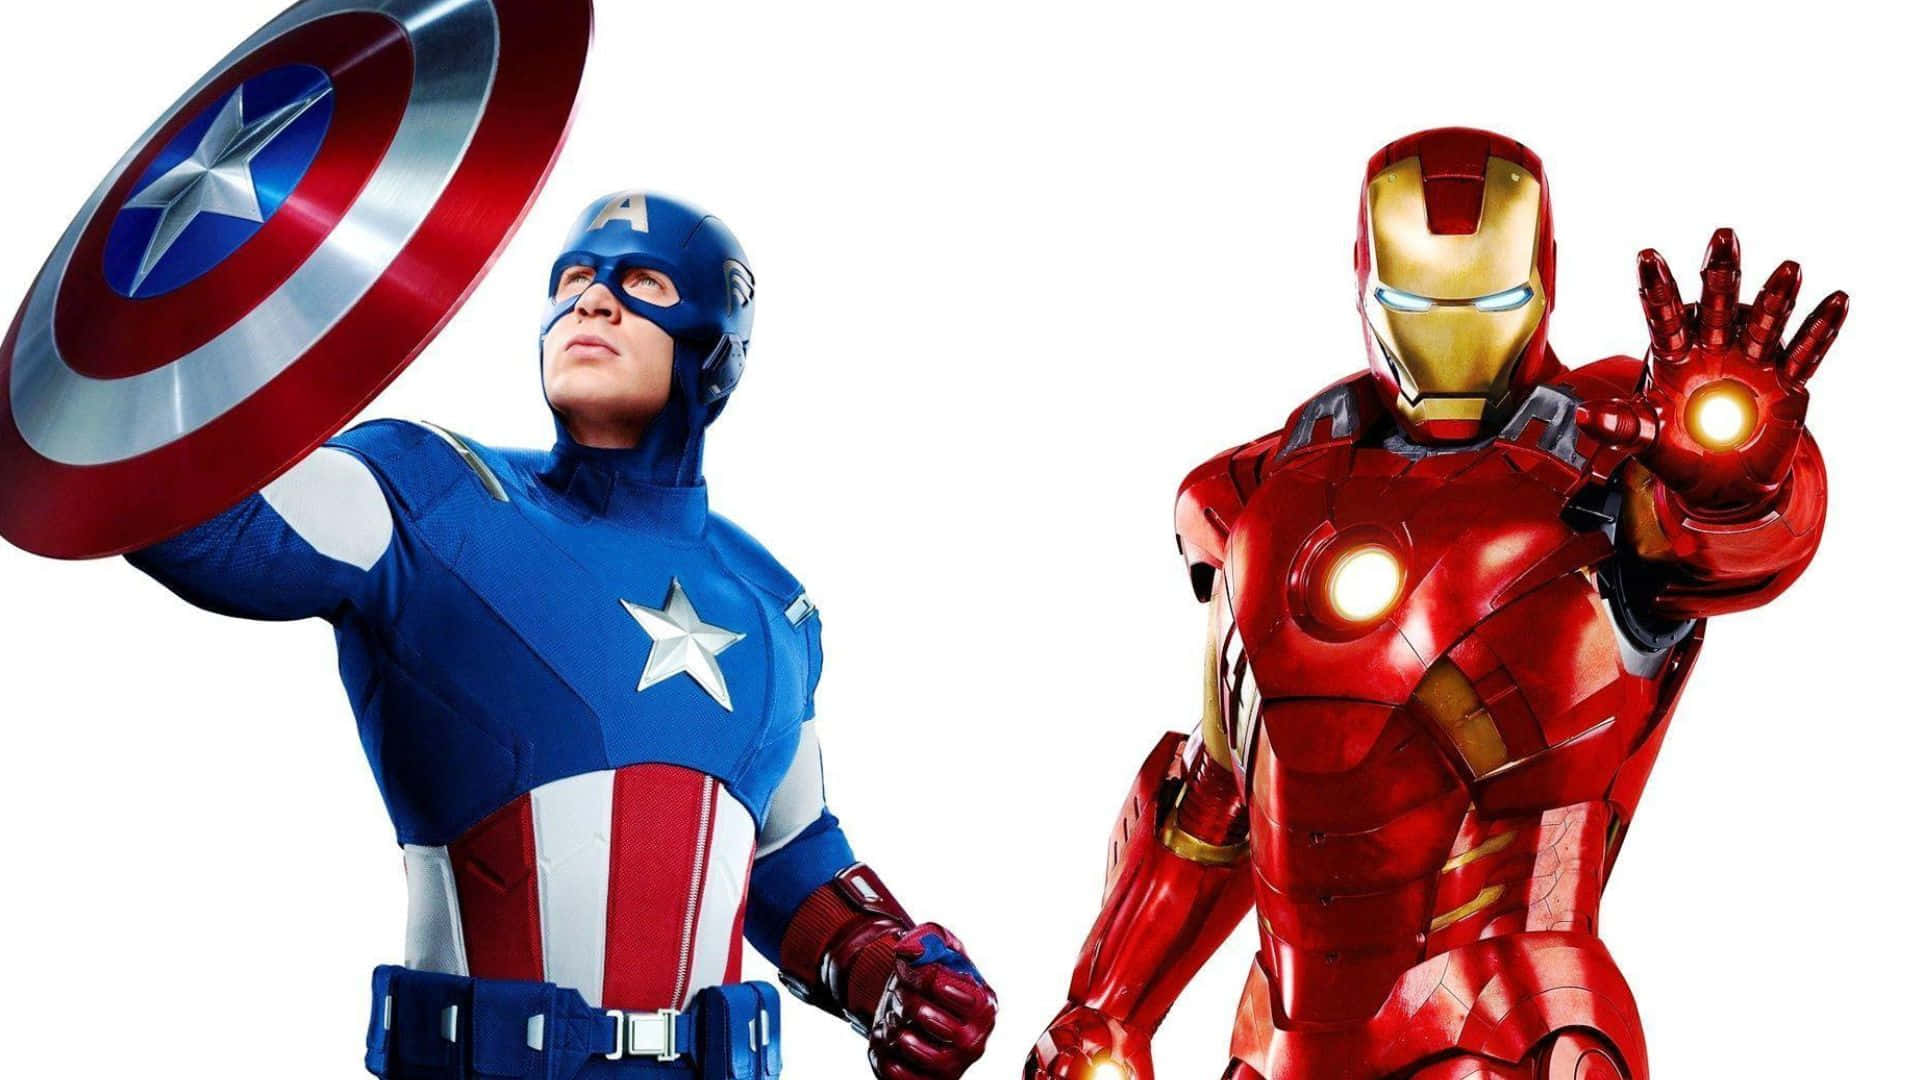 Iron Man and Captain America clash in epic battle Wallpaper